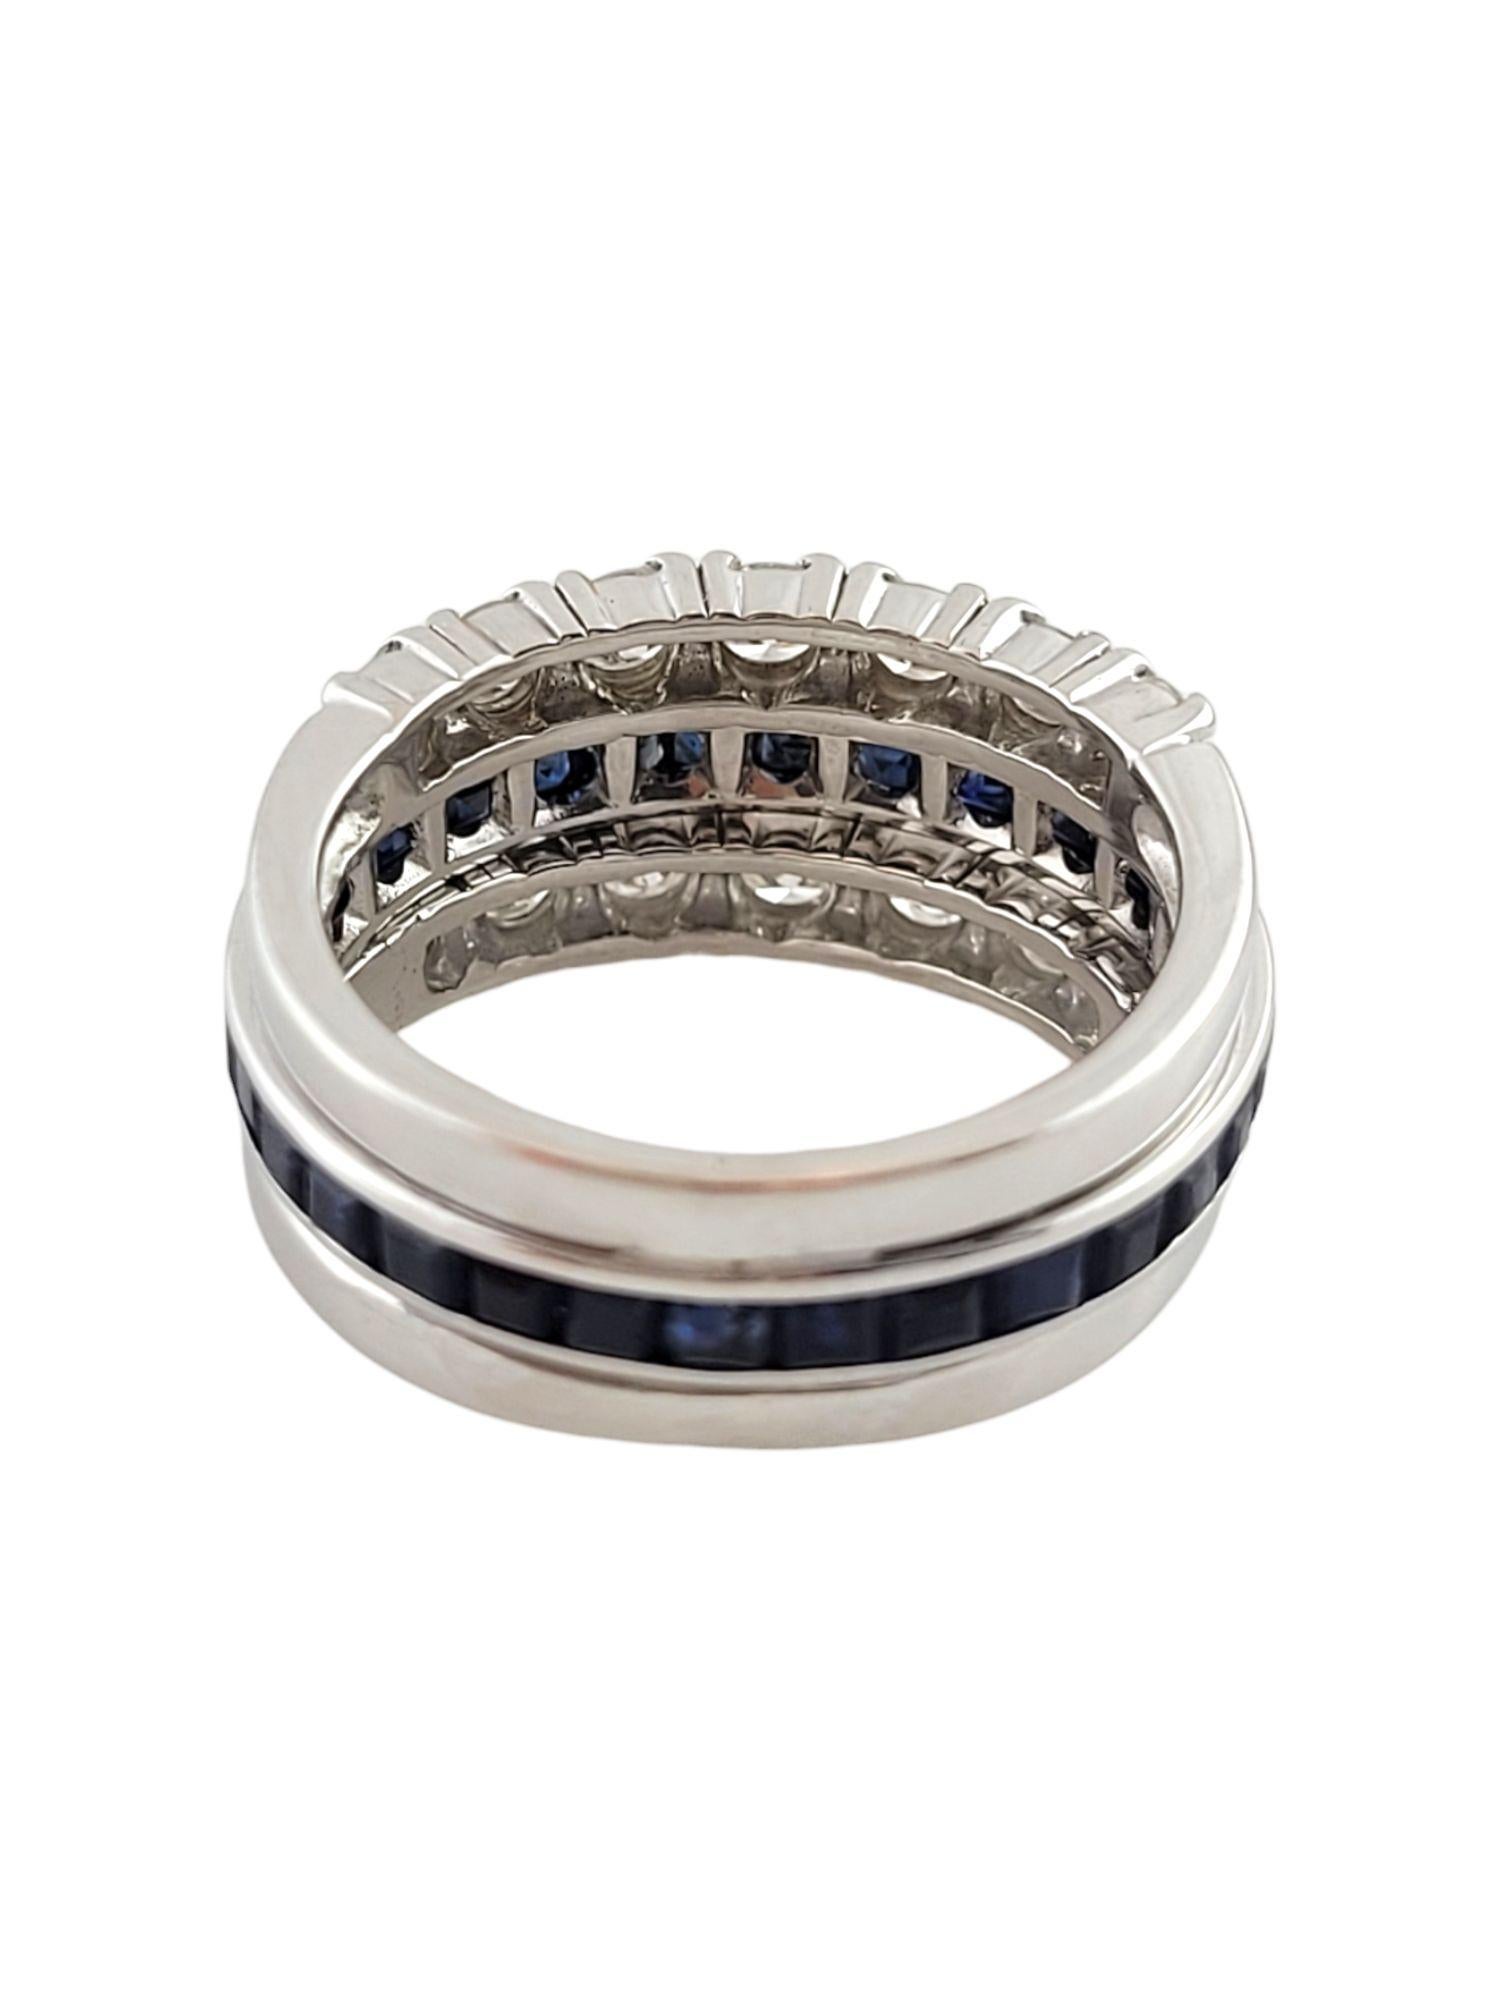 Vintage 14K White Gold Diamond Sapphire Ring Size 4.25

This gorgeous ring is decorated with 14 sparkling, round brilliant cut diamonds above and below a row of 30 gorgeous blue sapphires that wrap around the entire band!

Approximate total diamond